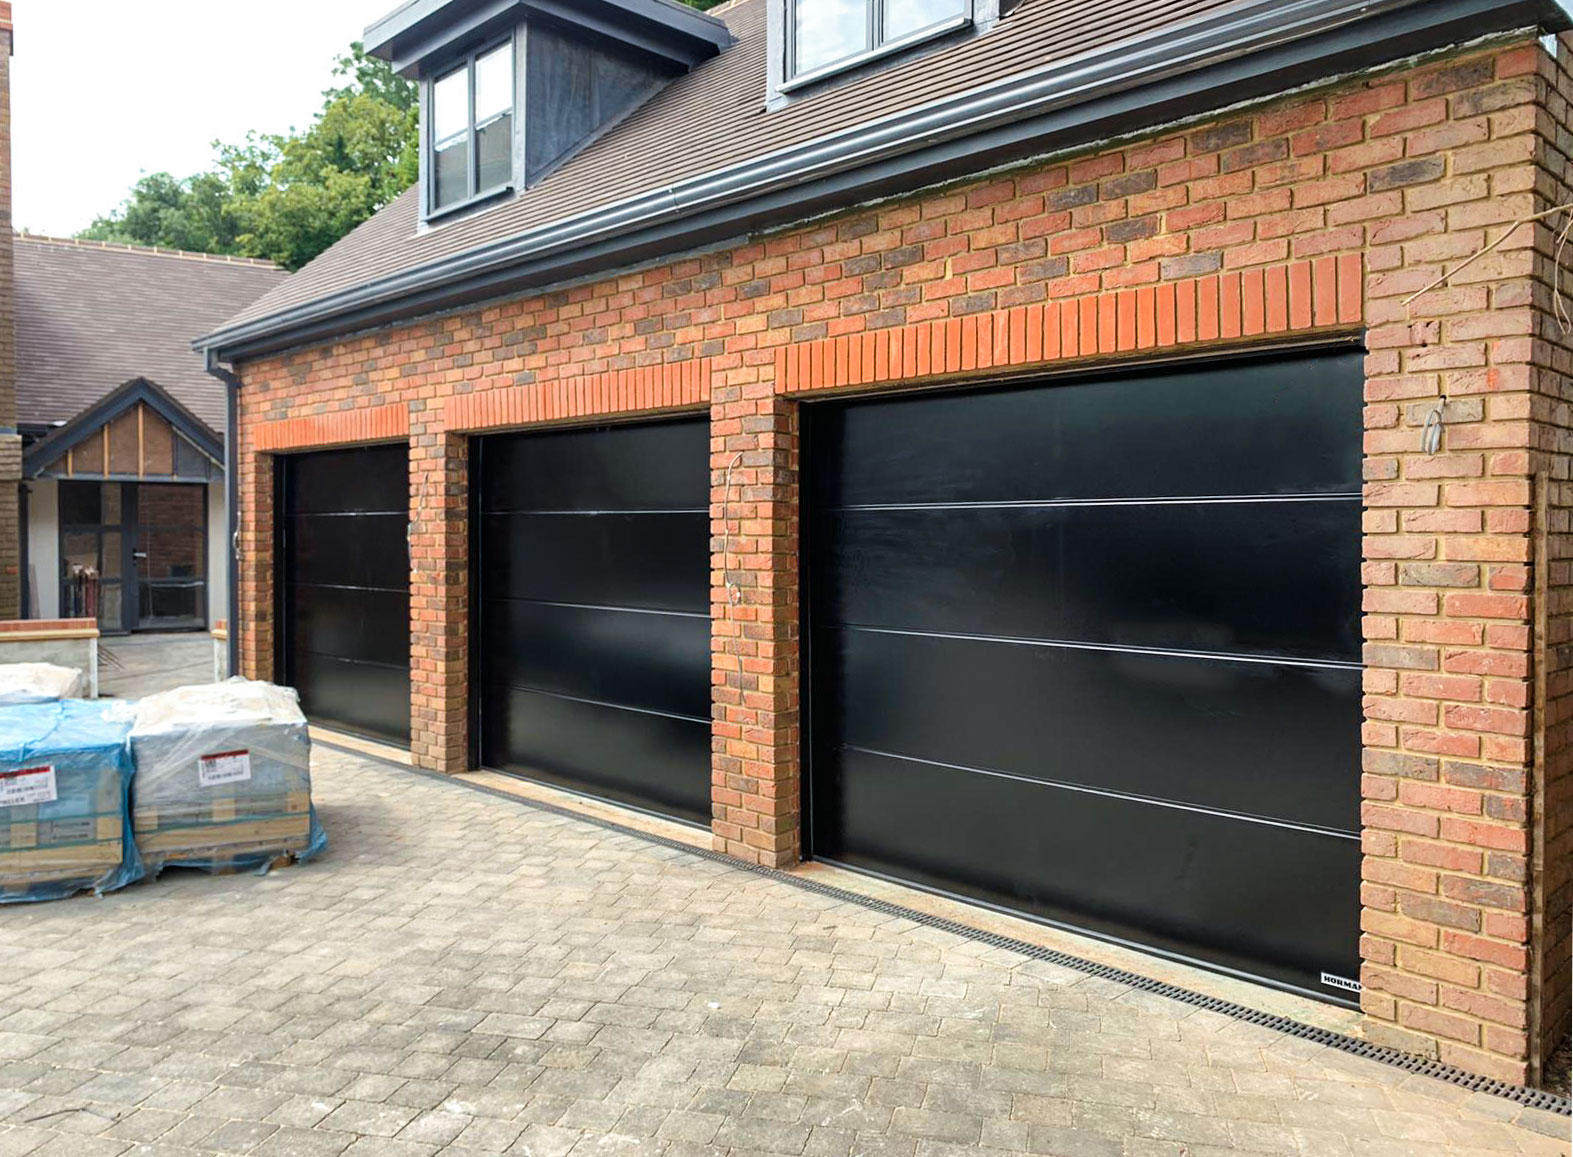 3x Hormann LPU42 L-Ribbed Insulated Sectional Garage Doors finished in Black